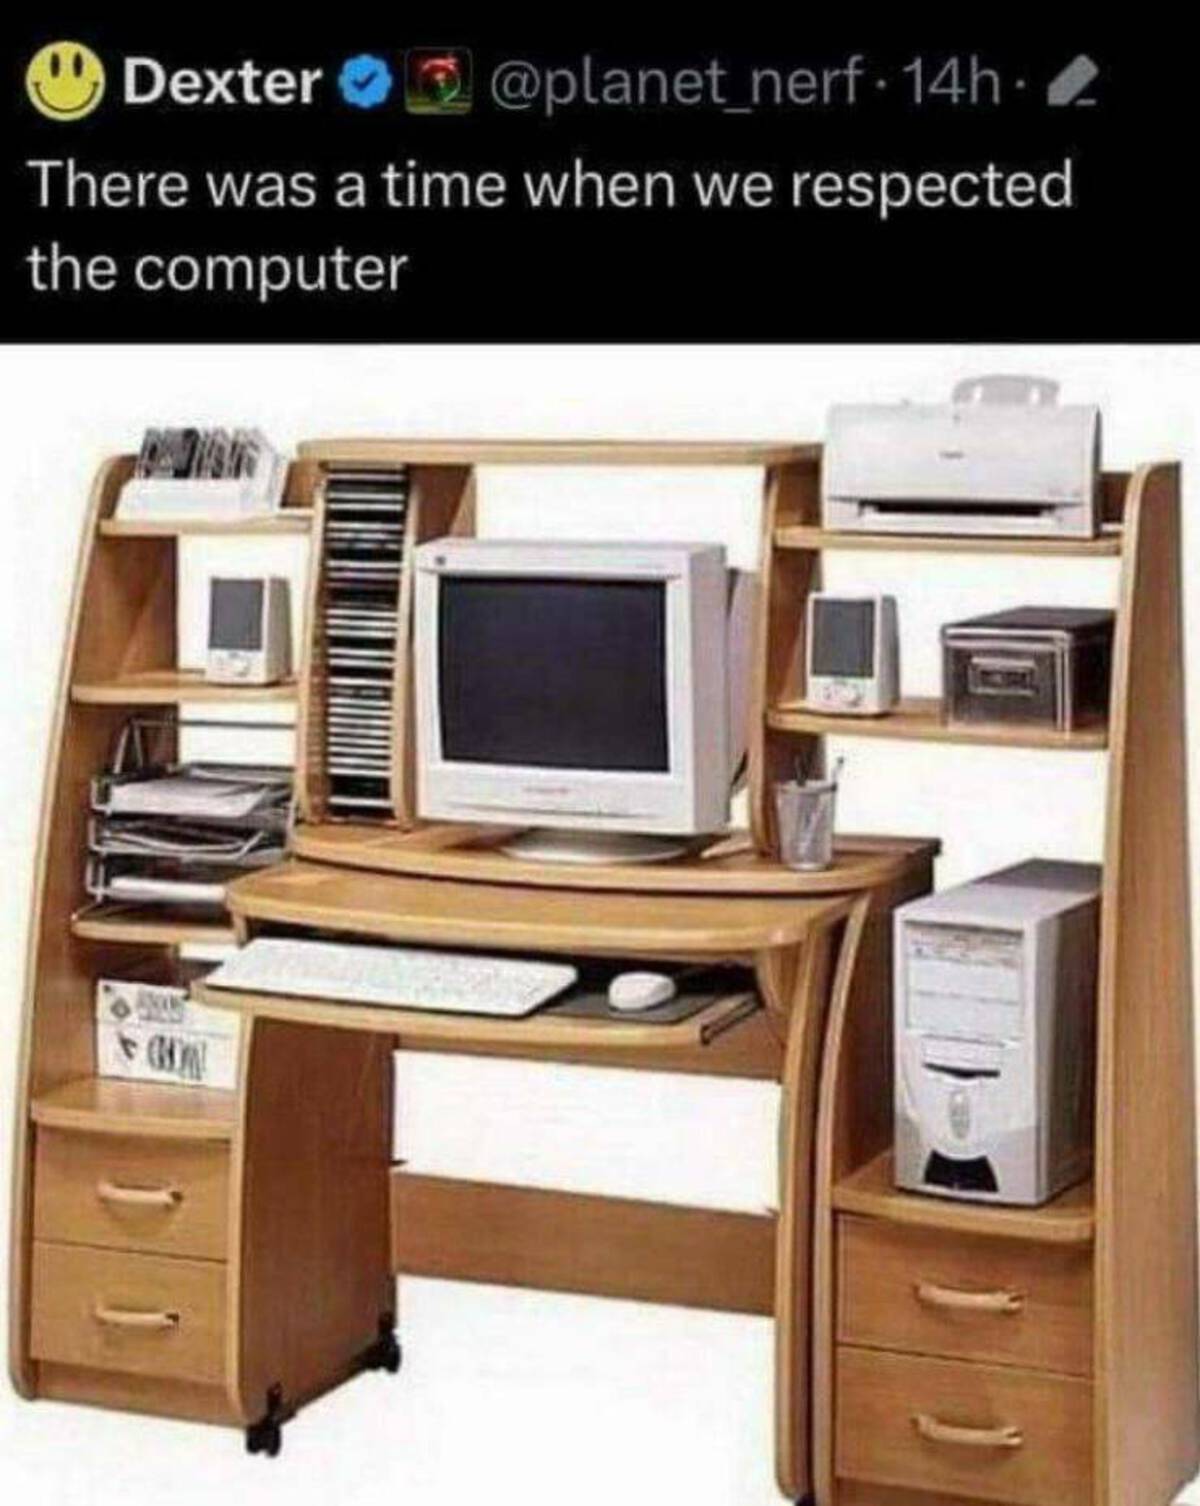 there was a time when we respected - Dexter 14h. There was a time when we respected the computer Go